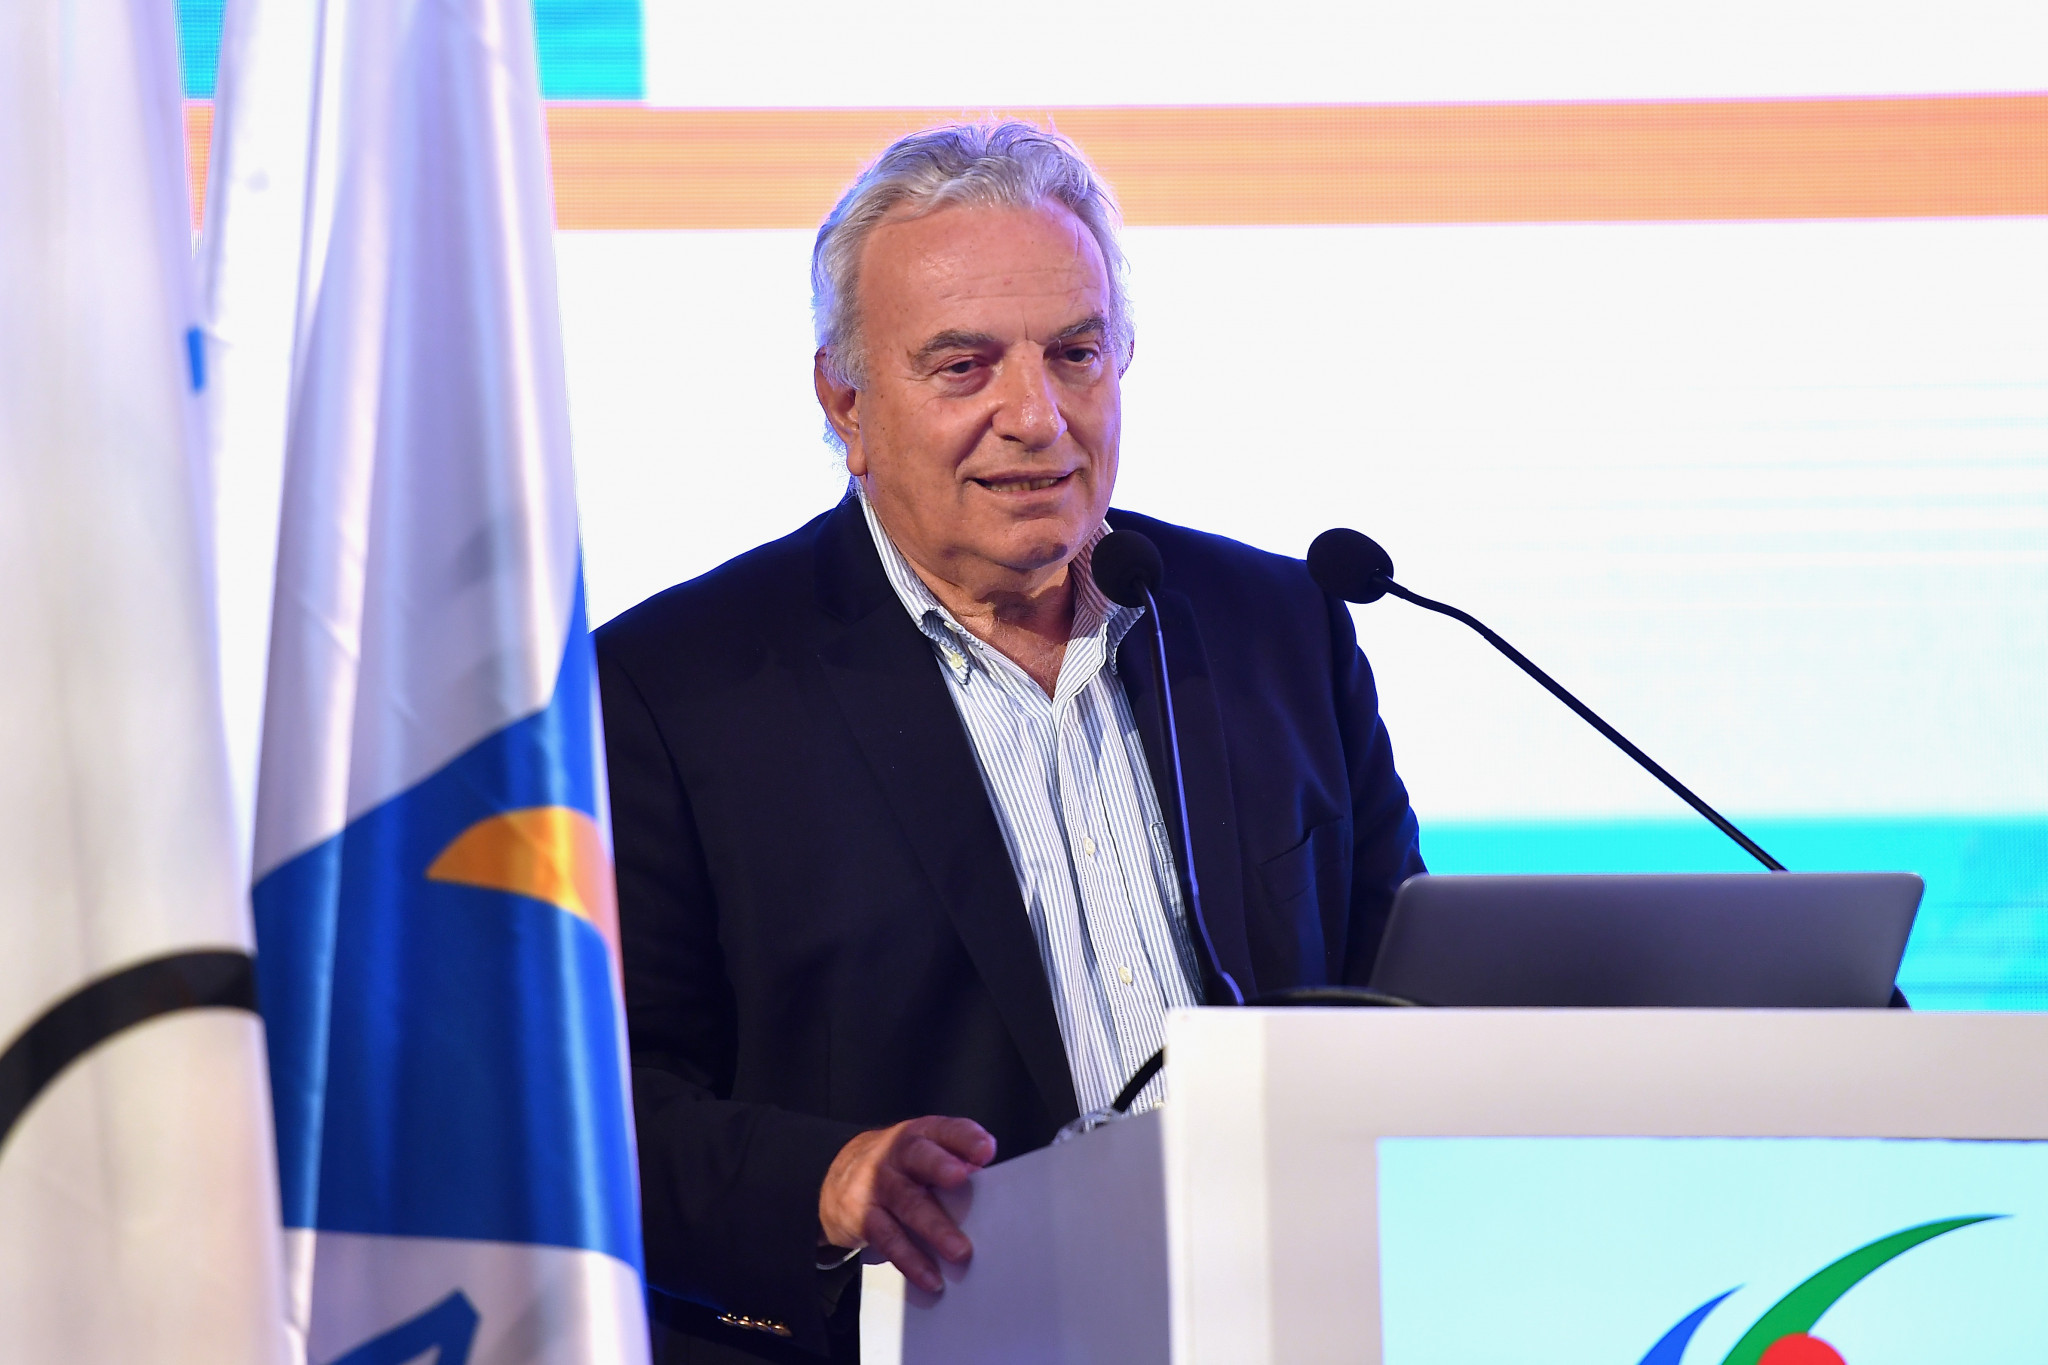 ASOIF President claims IOC has become "umbrella of sports movement" in backing of GAISF dissolution